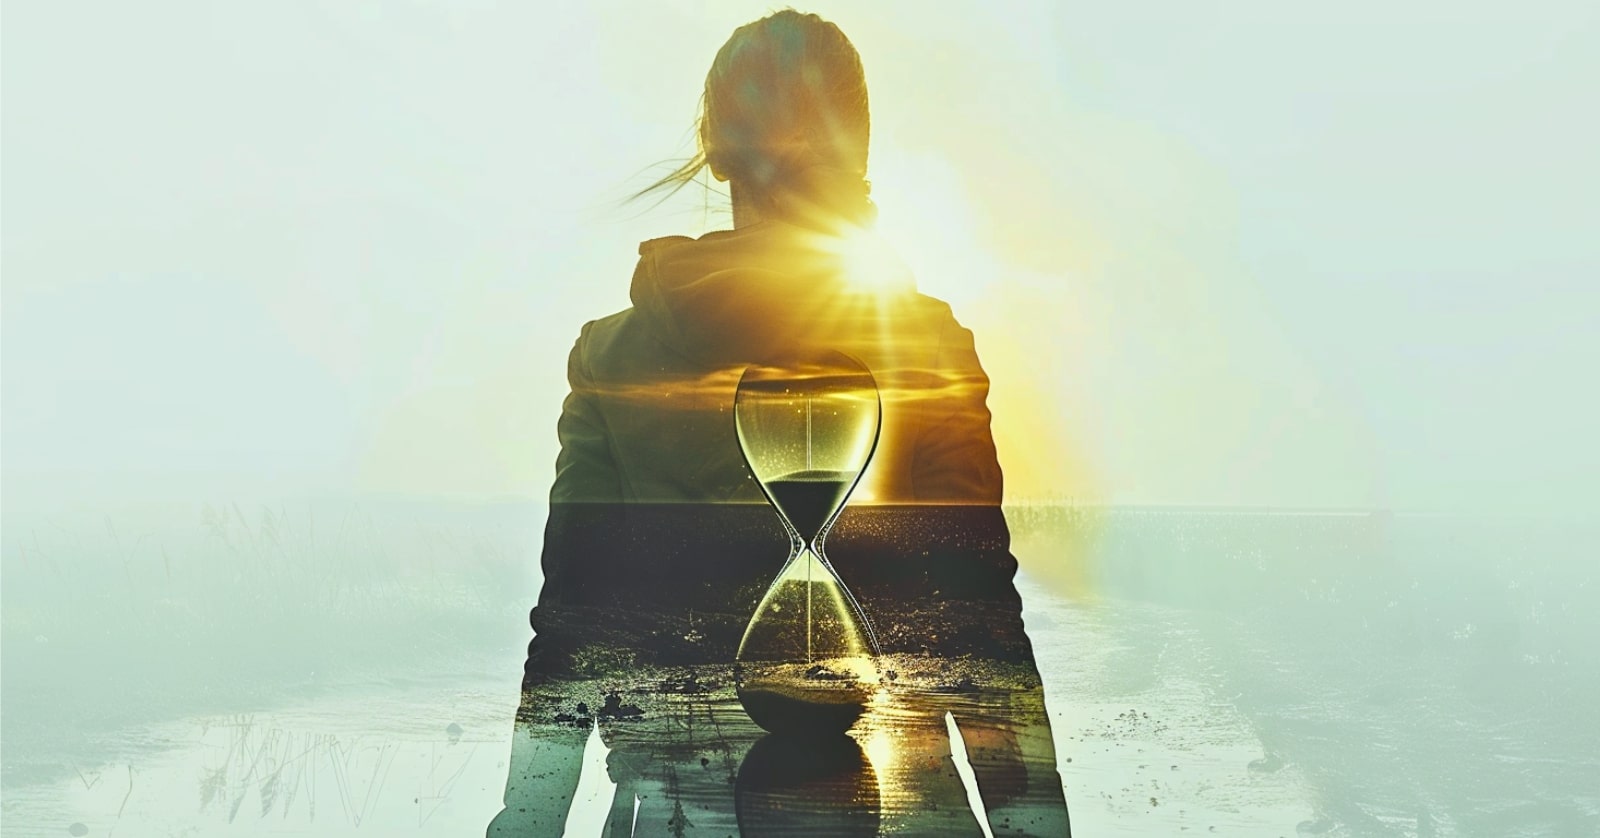 double exposure image of a woman walking away from camera with an hourglass timer superimposed on her back